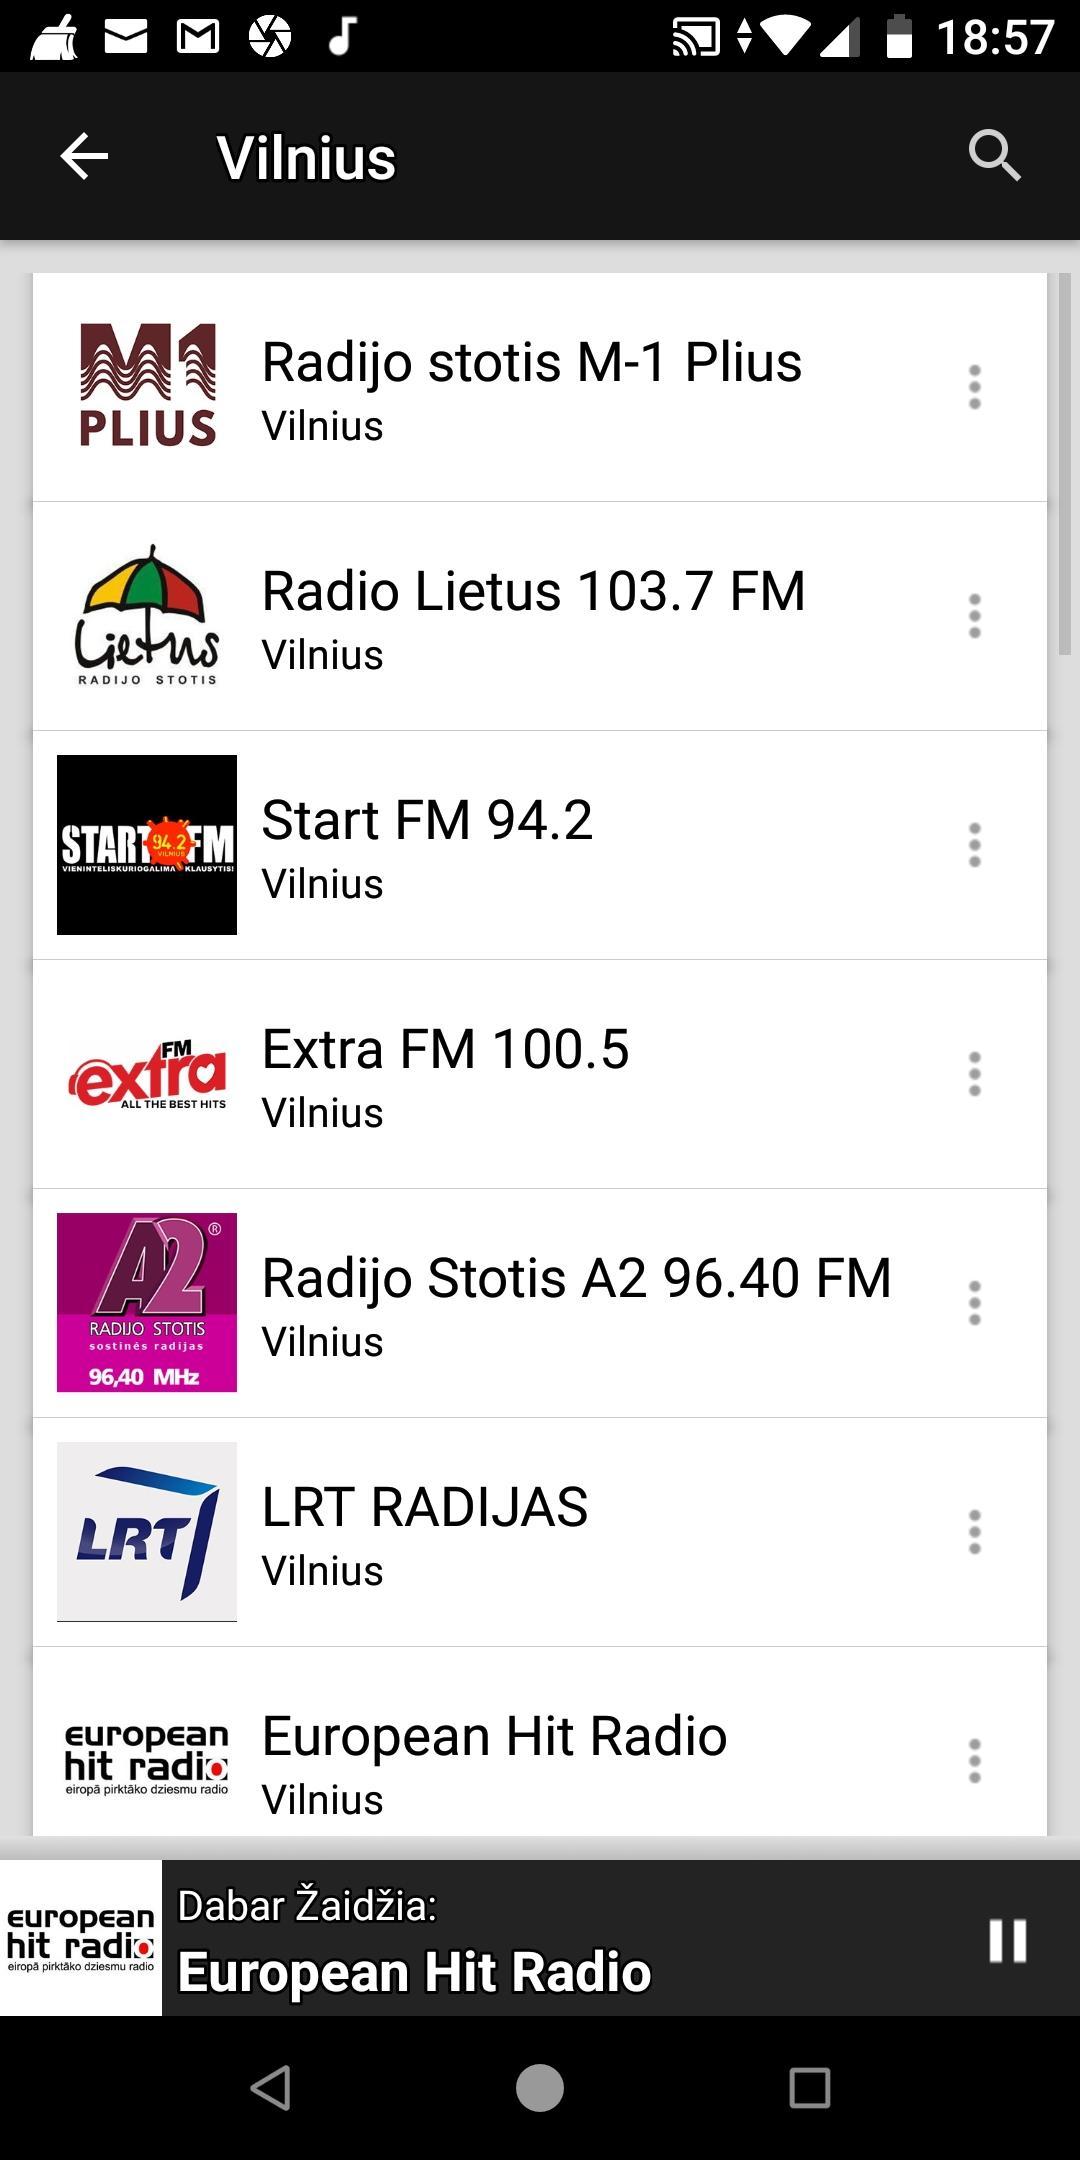 Vilnius Radio Stations - Lithuania for Android - APK Download